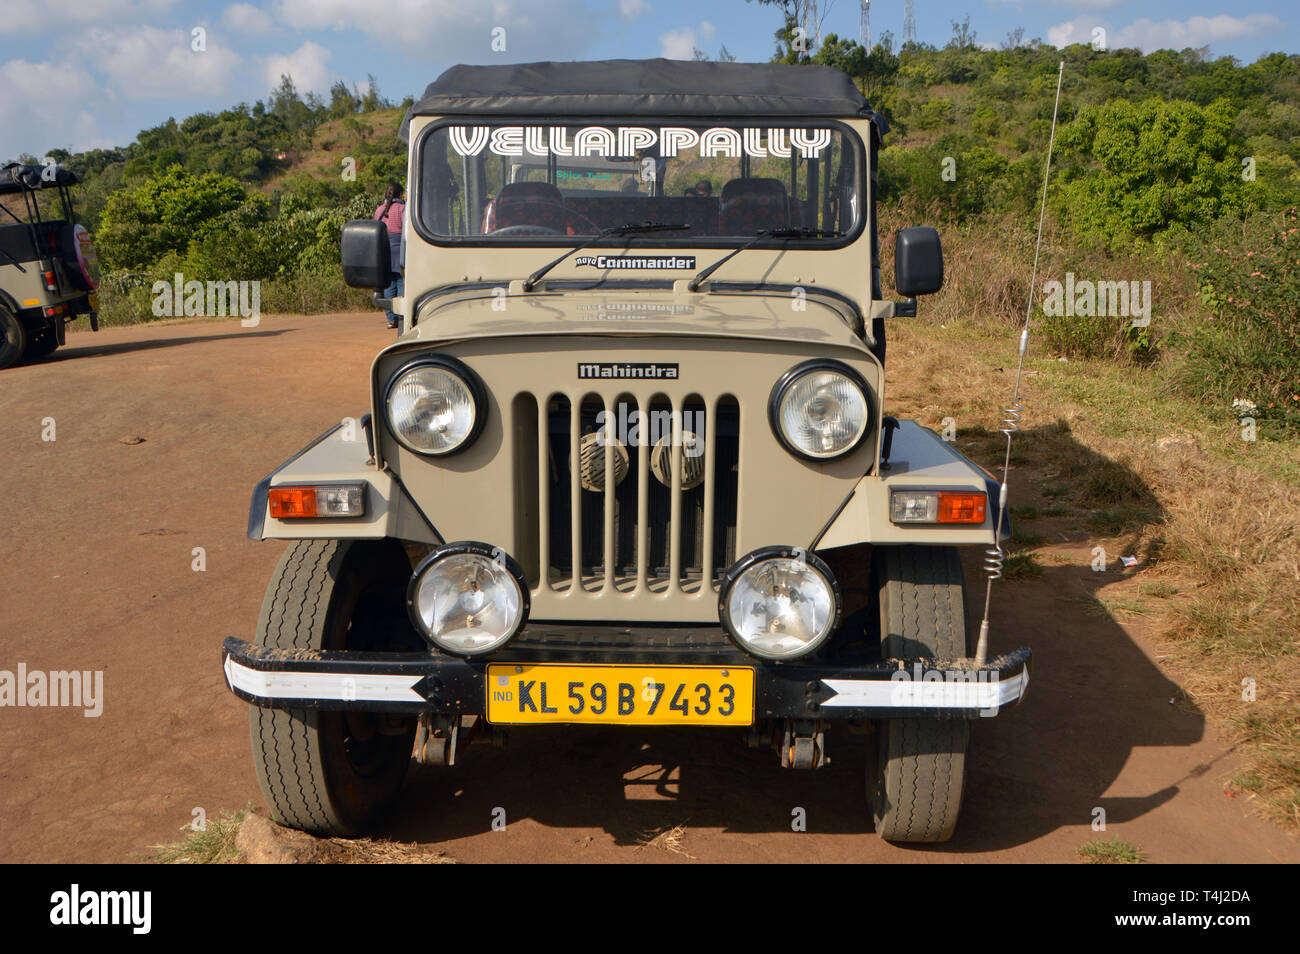 Jeep of the brand "Mahindra" in the Periyar National Park in the south of India, recorded on 11.02.2019 | usage worldwide Stock Photo